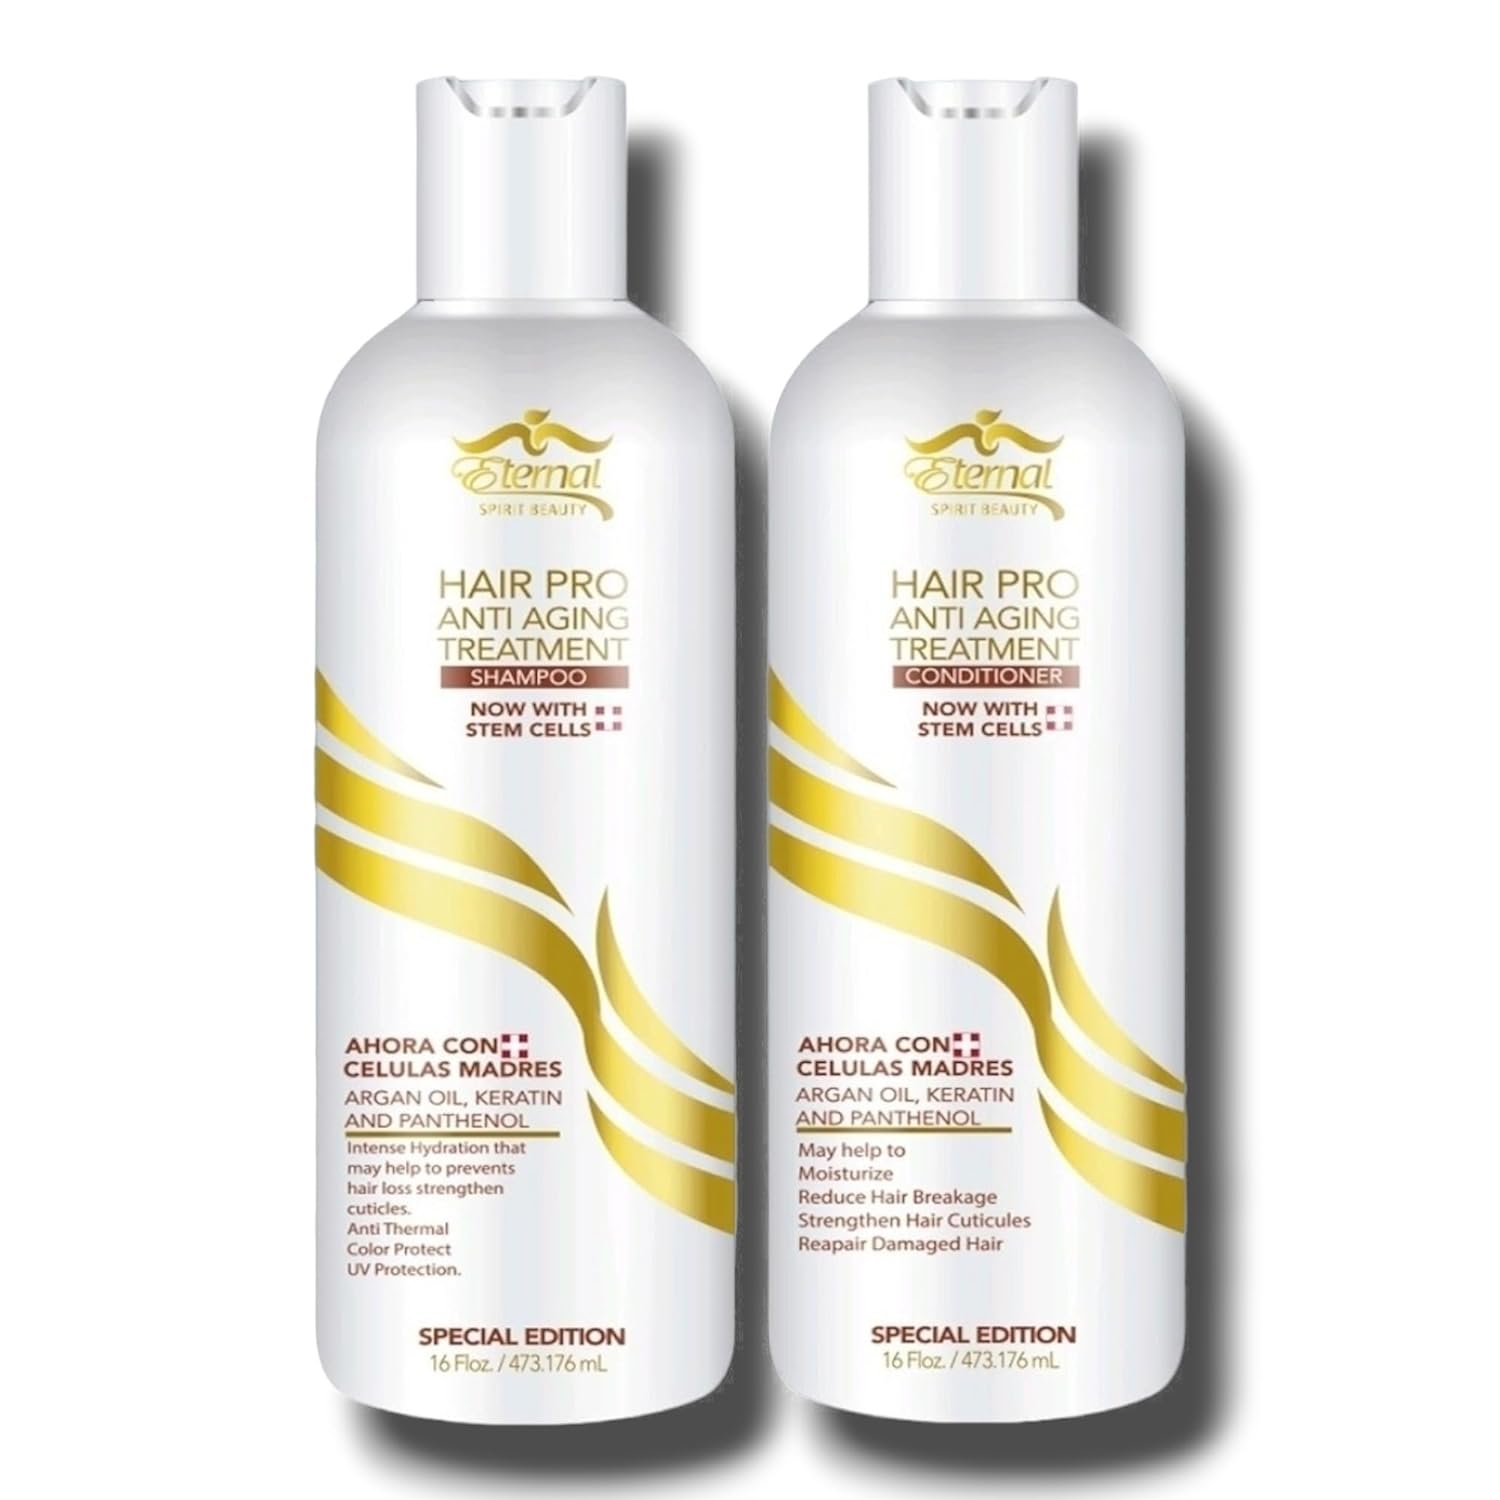 Eternal Spirit Hair Pro Anti Aging Treatment Shampoo and Conditioner Bundle with Stem Cells